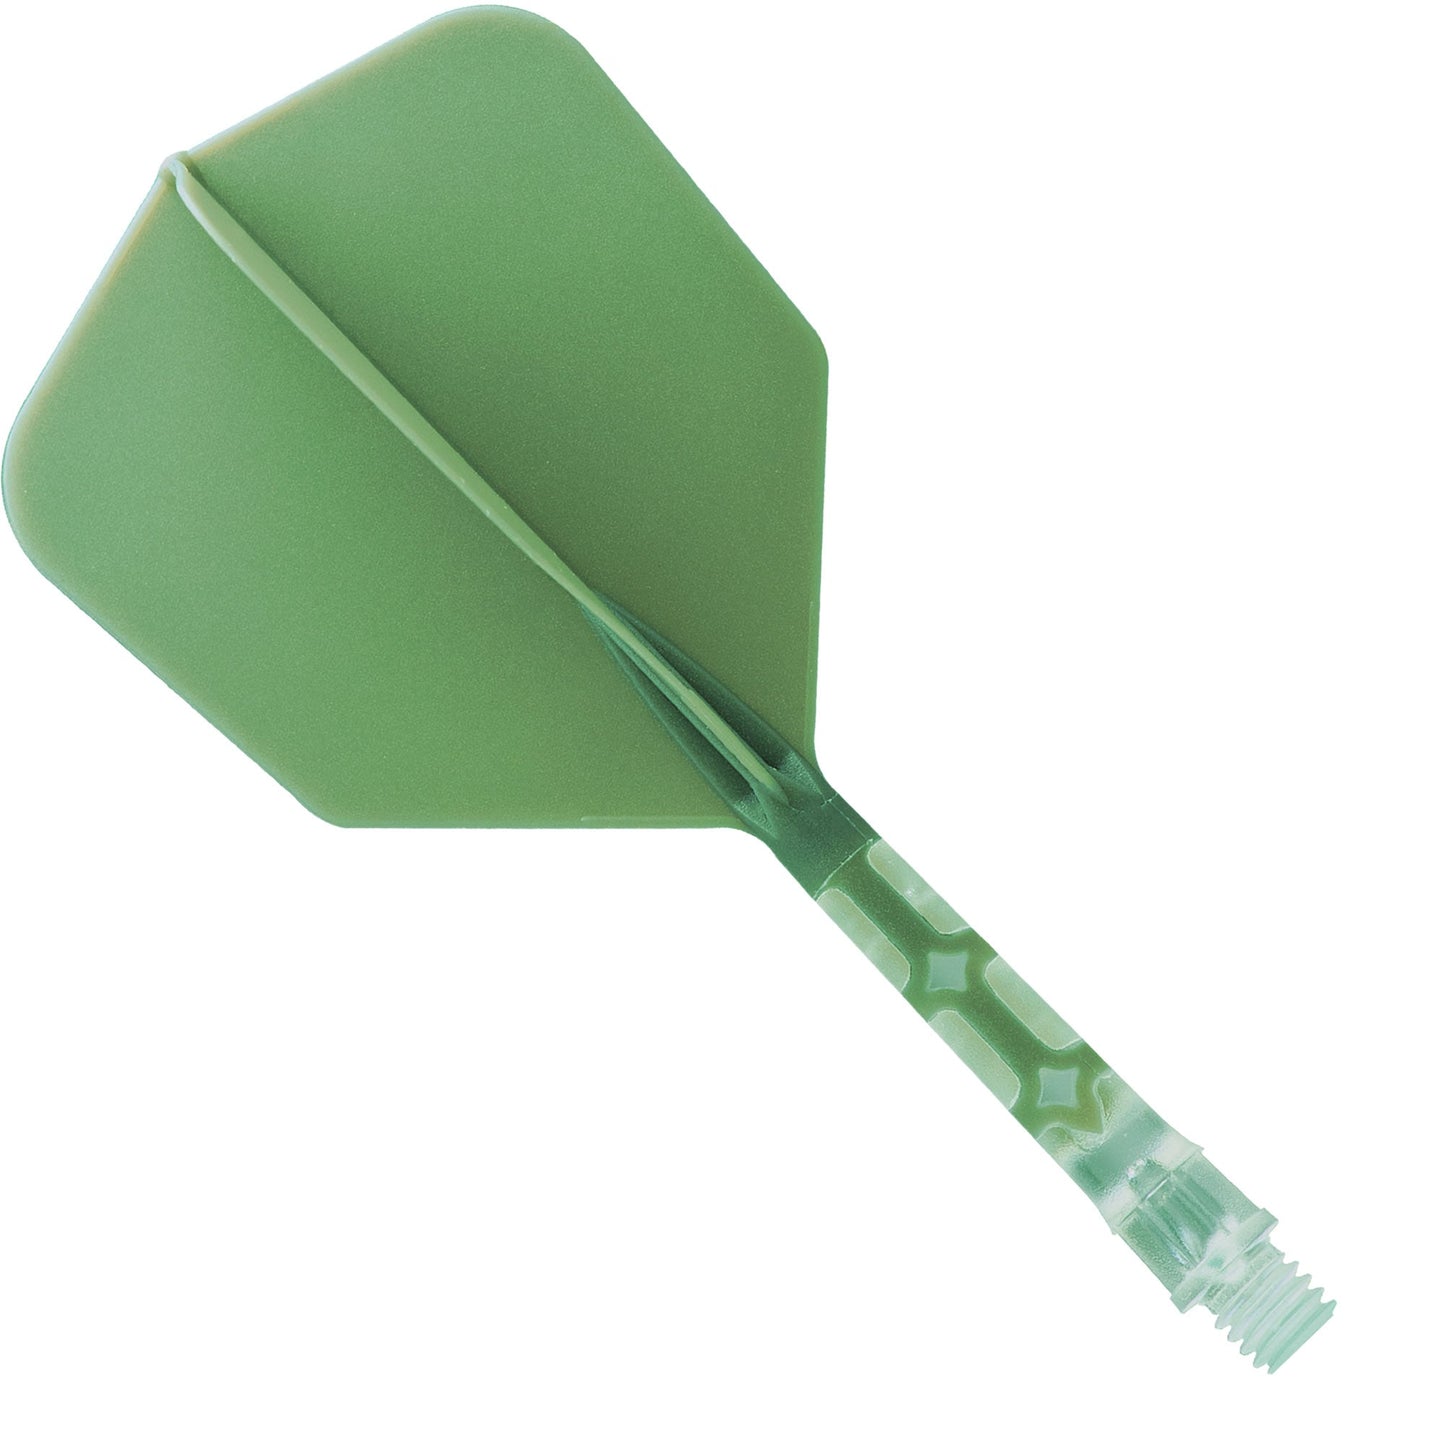 Cuesoul Rost T19 Integrated Dart Shaft and Flights - Big Wing - Clear with Green Flight Medium